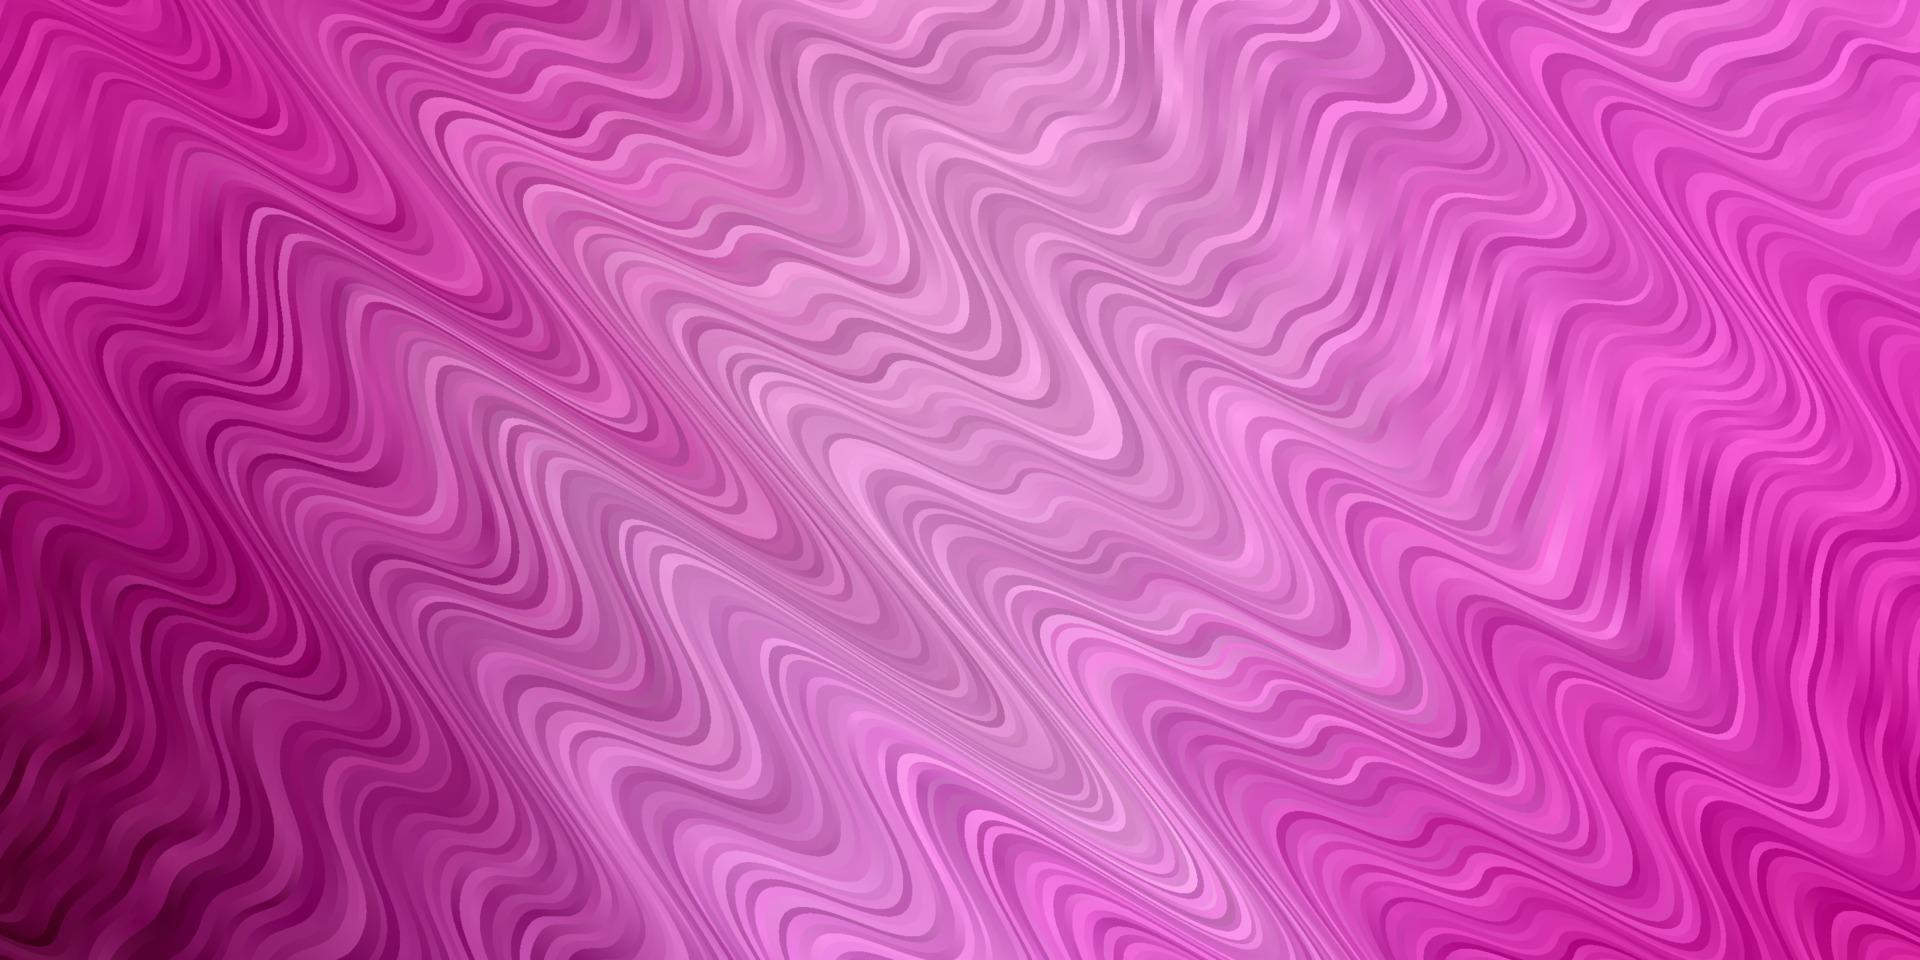 Light Pink vector pattern with curves.